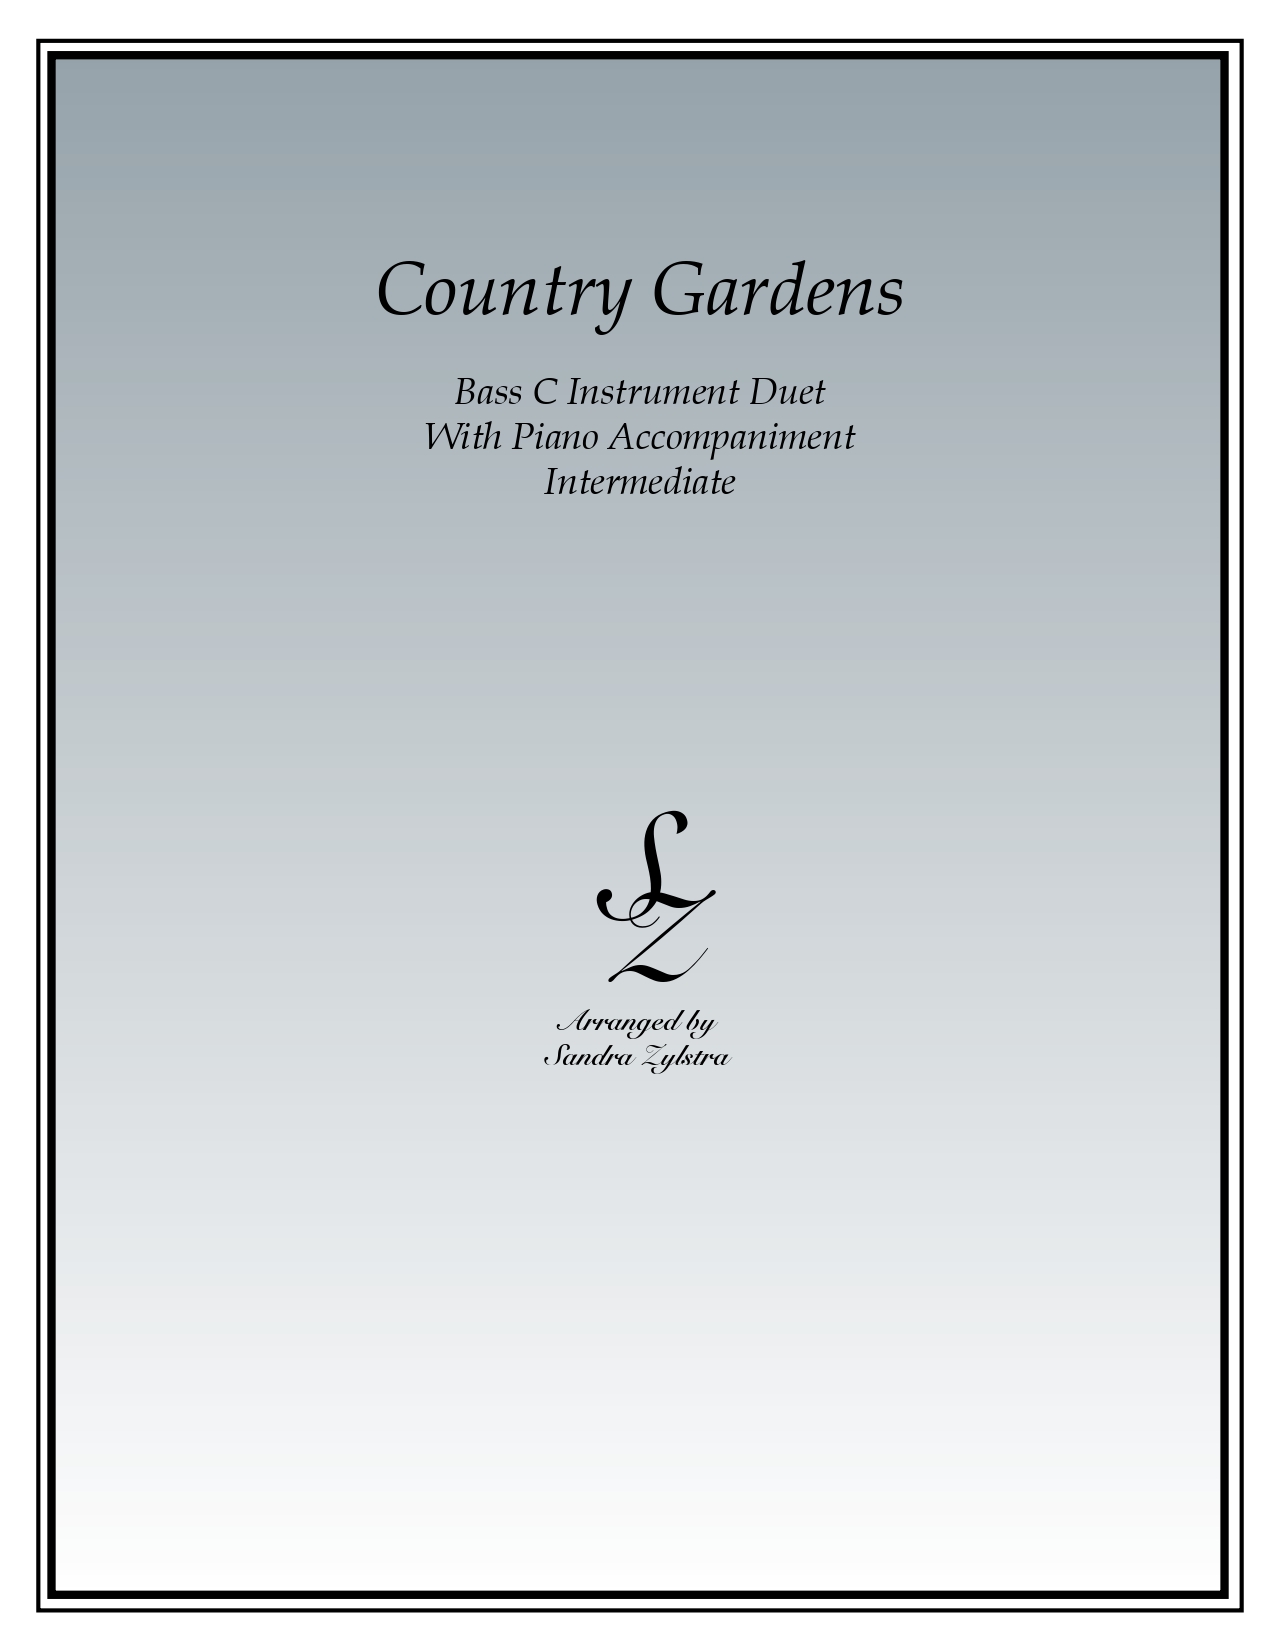 Country Gardens bass C instrument duet parts cover page 00011